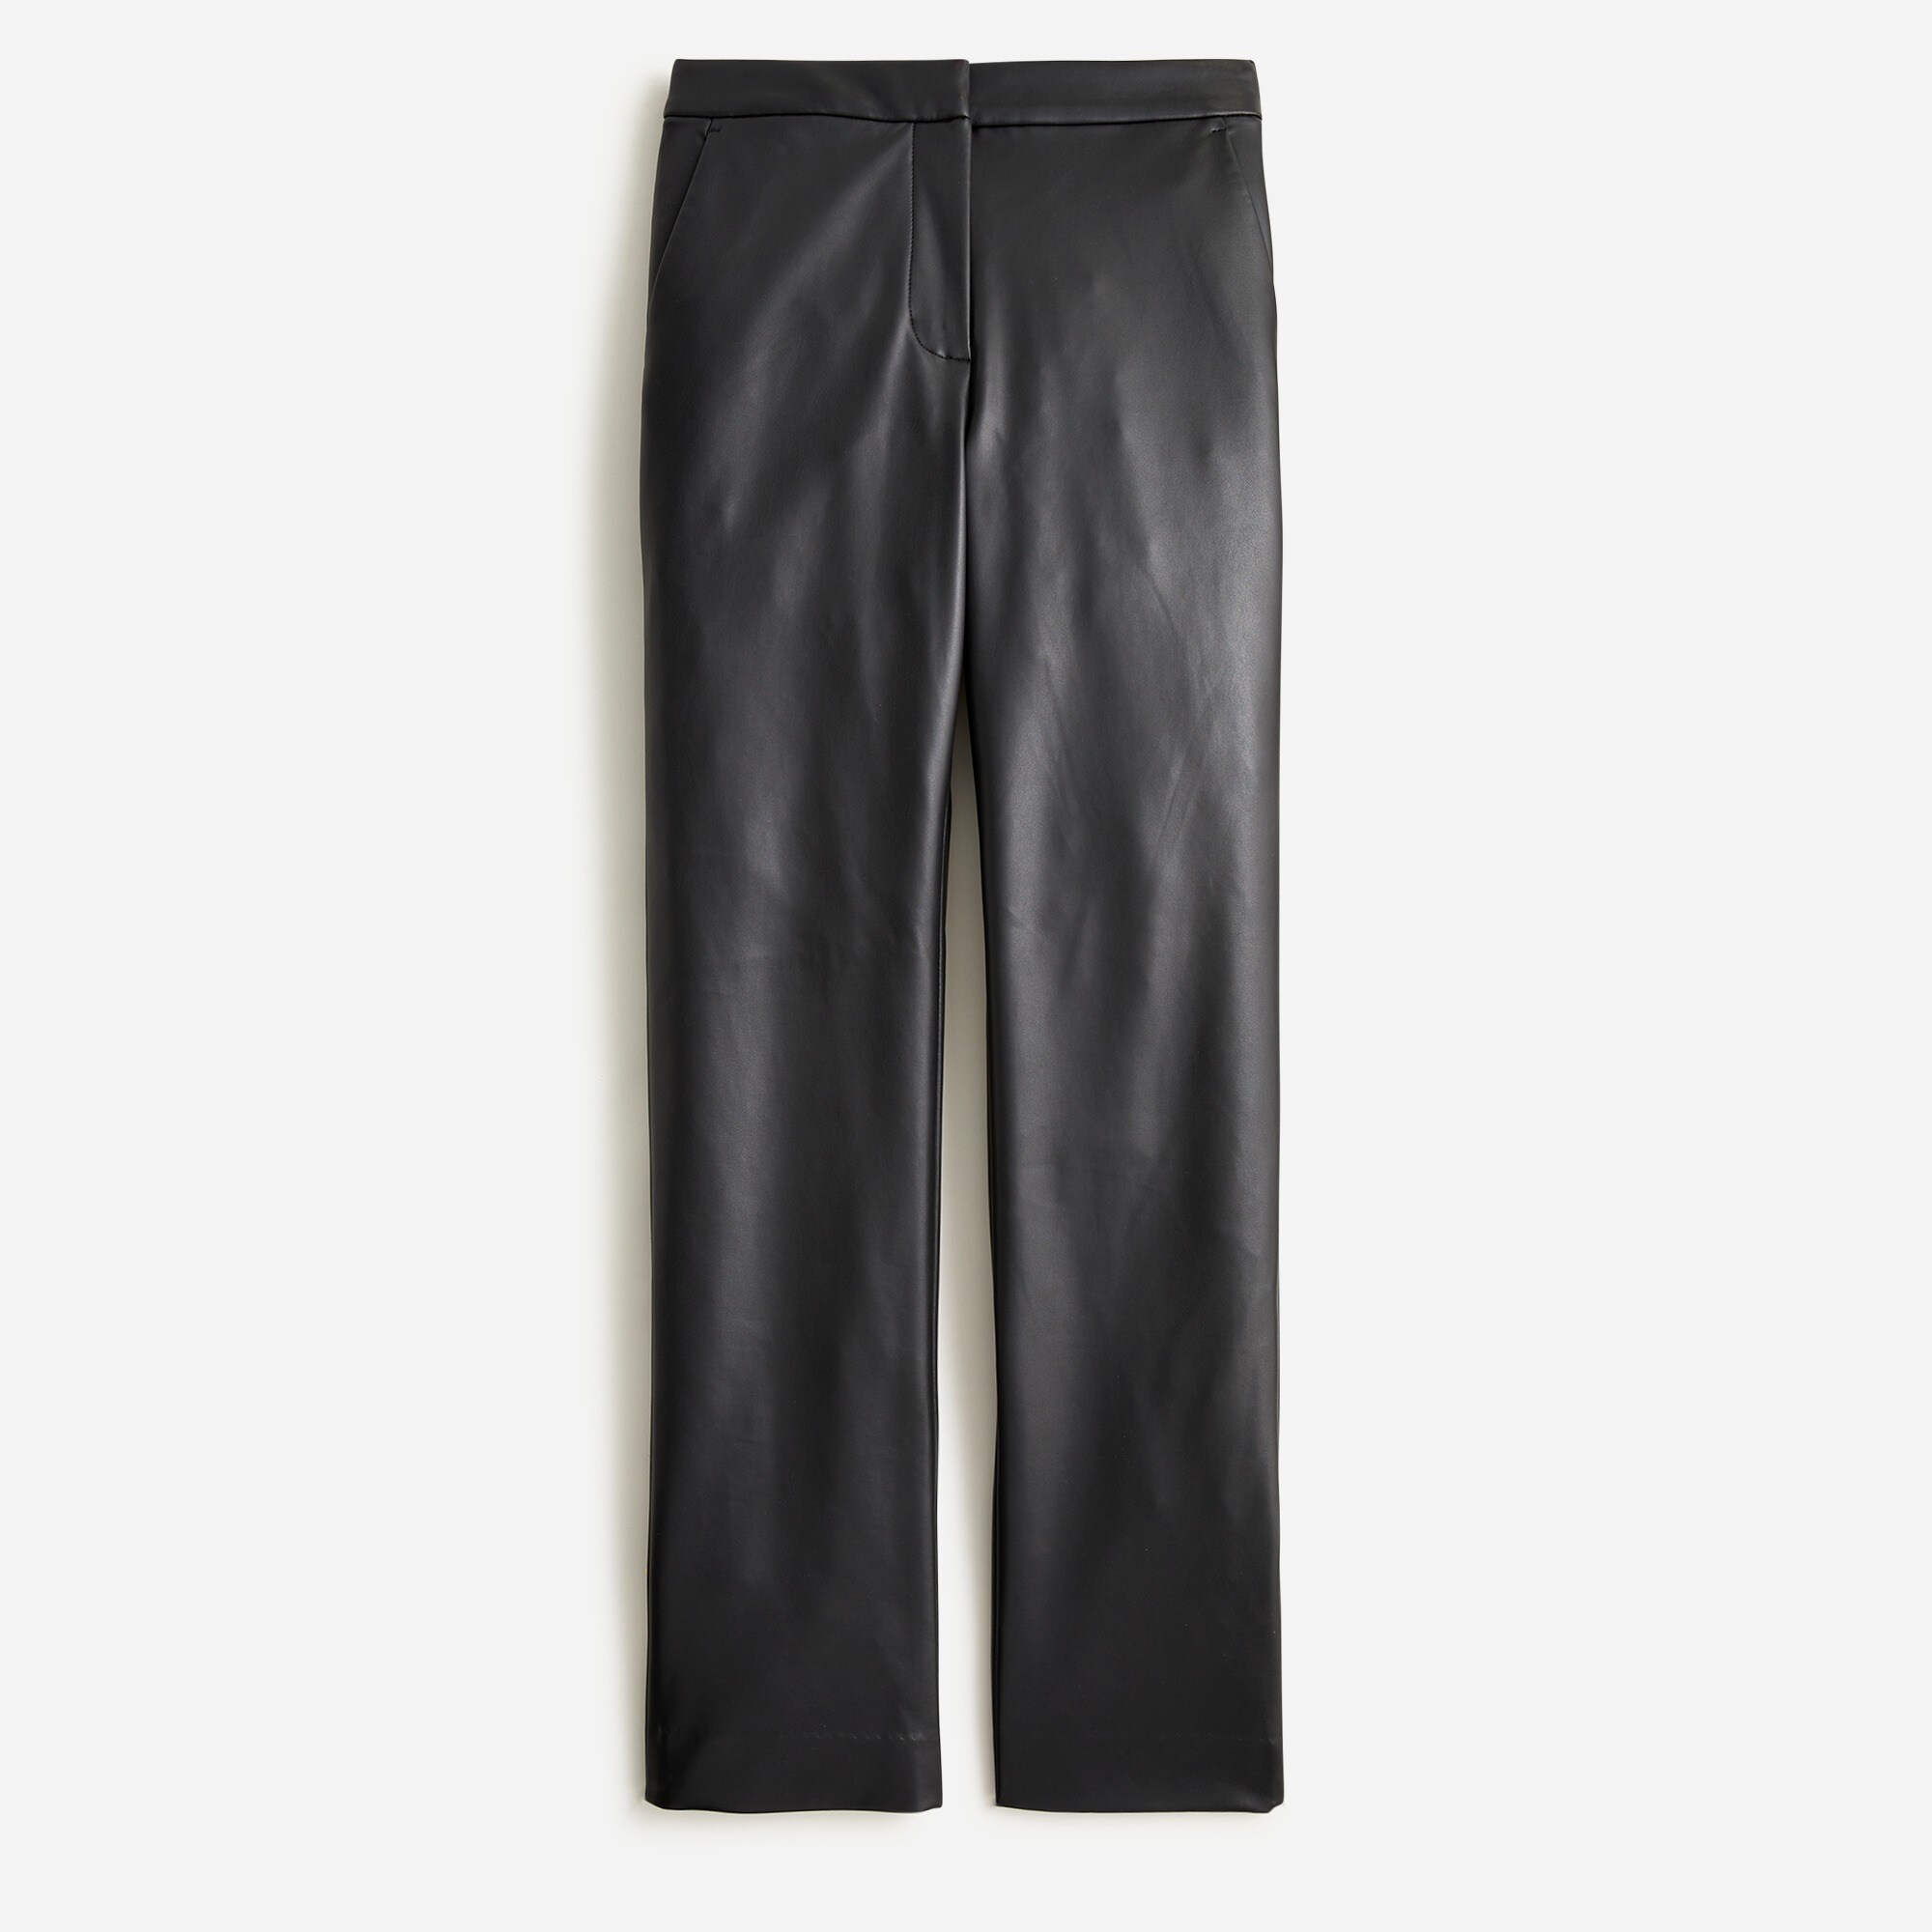 J.Crew: Kate Straight-leg Pant In Faux Leather For Women